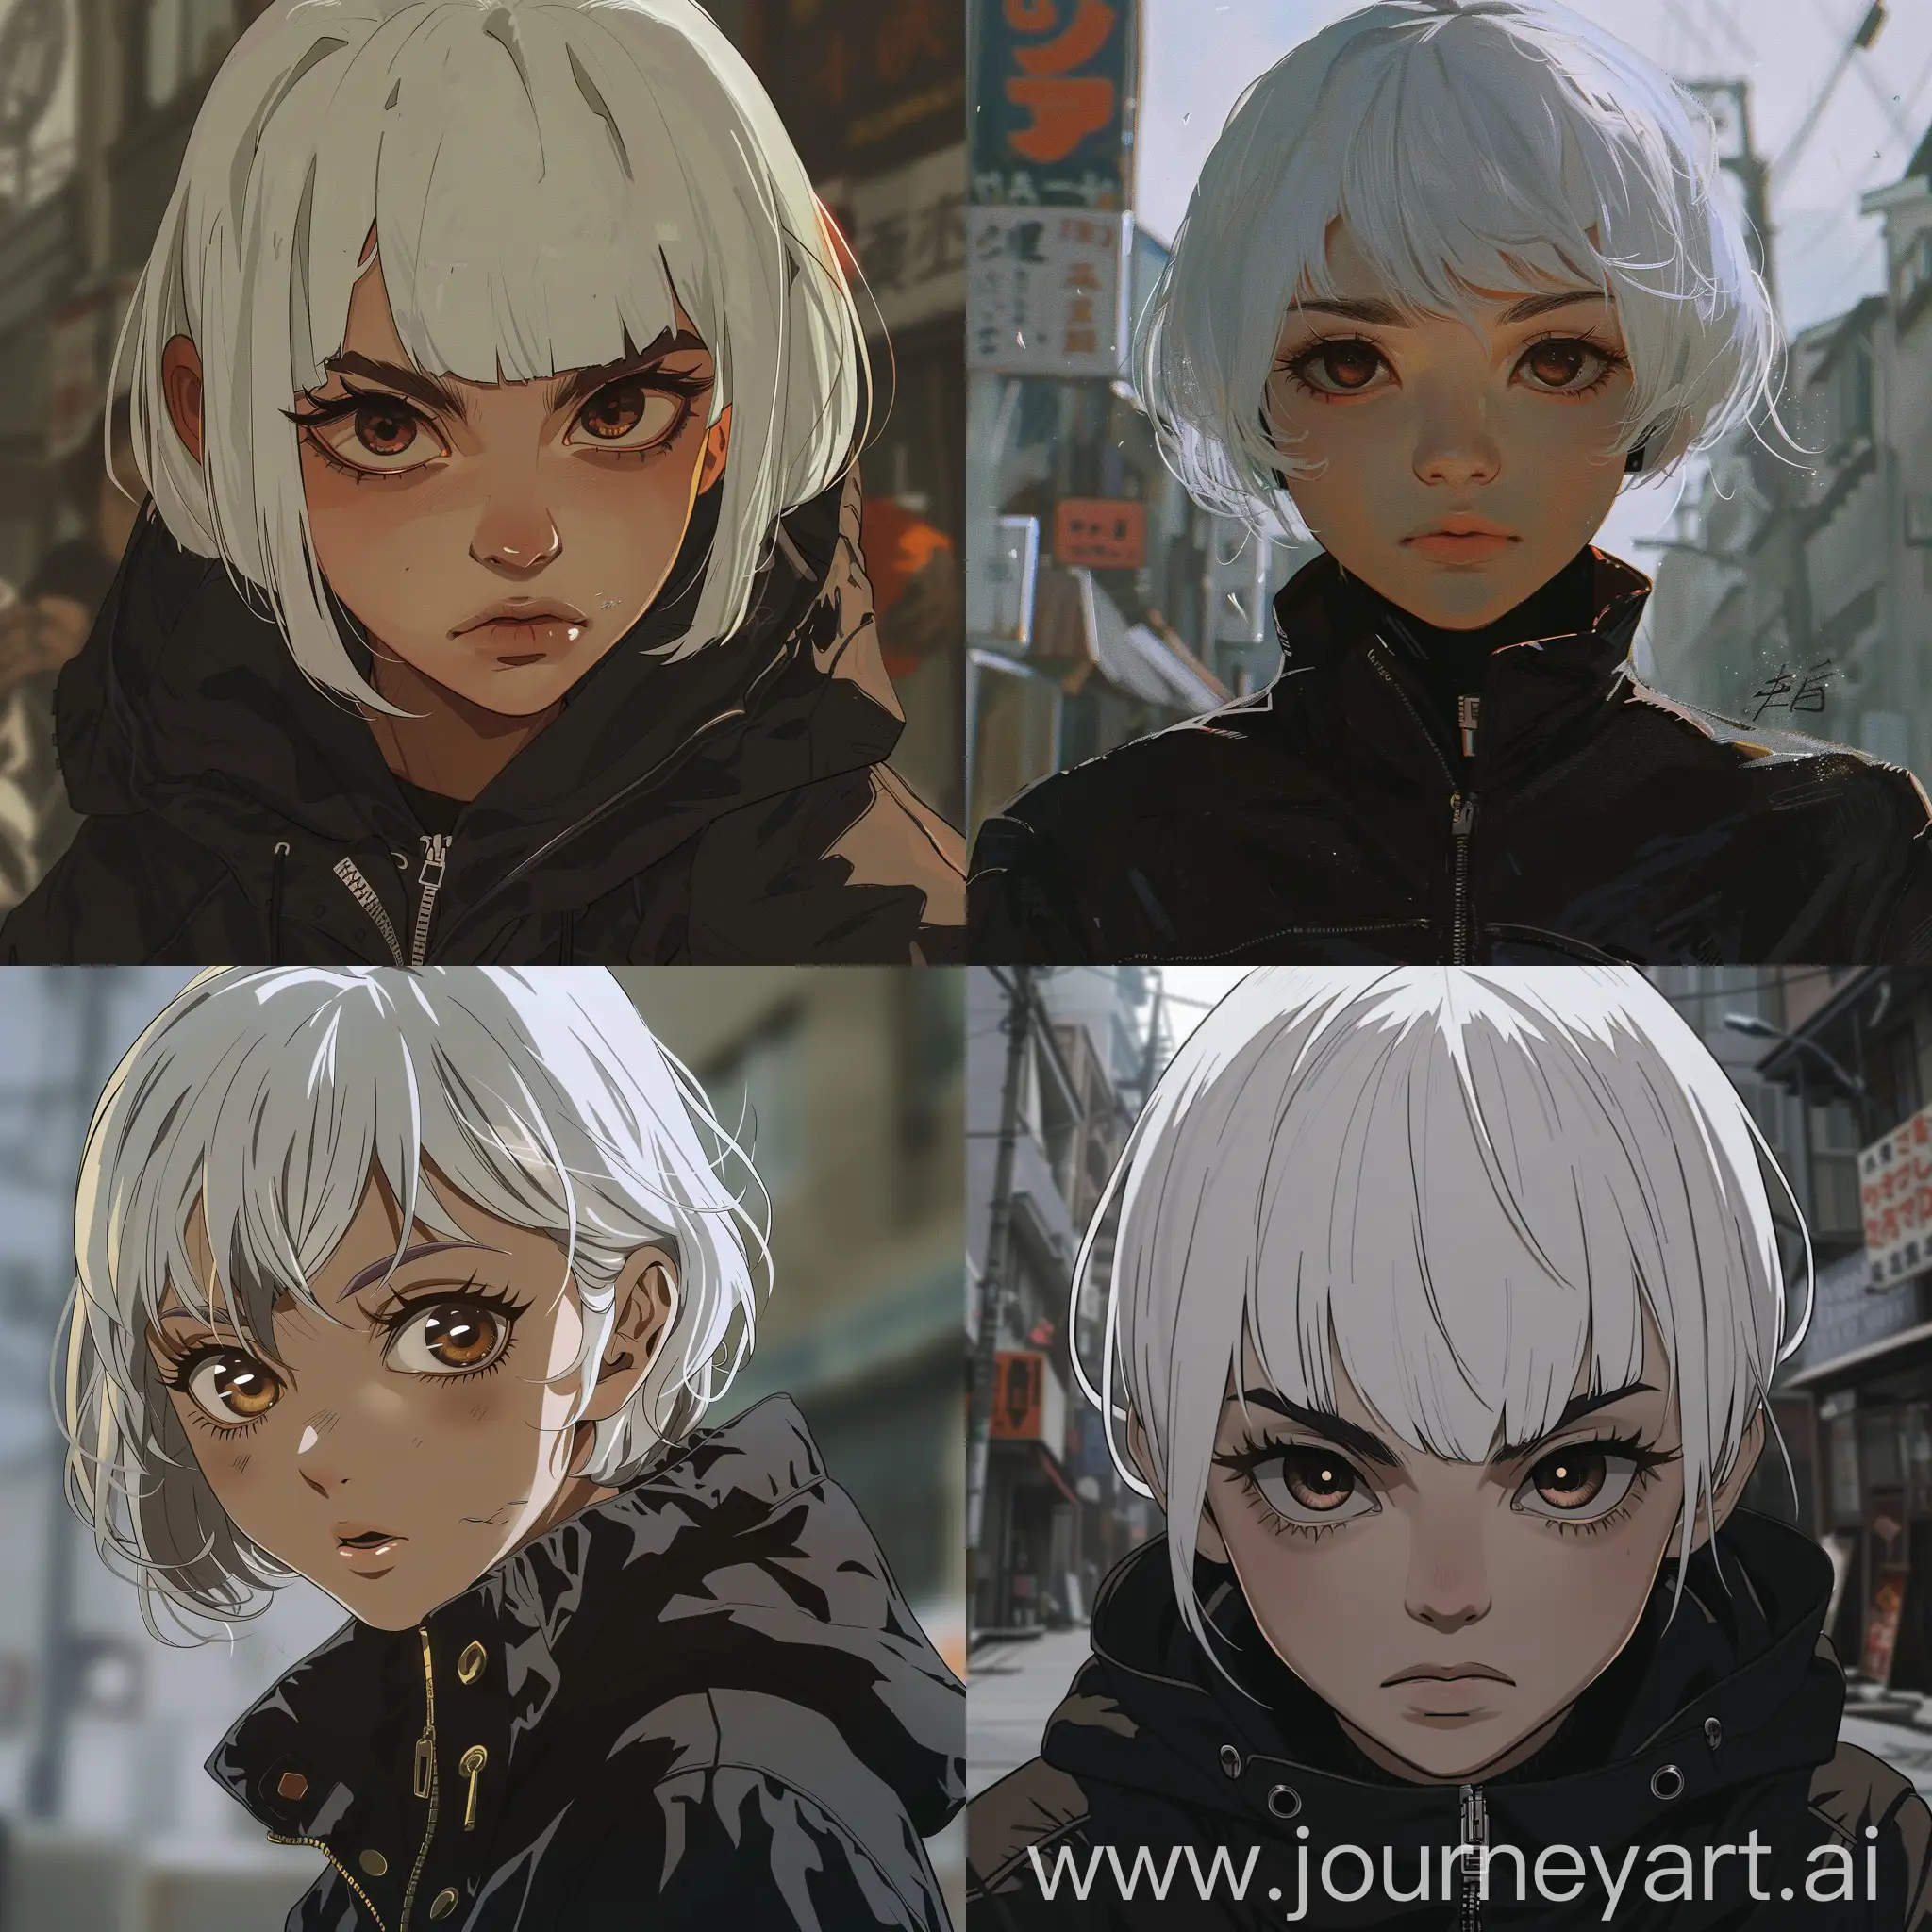 Badass-Anime-Woman-with-Short-White-Hair-in-Detailed-Black-Jacket-Retro-Street-Style